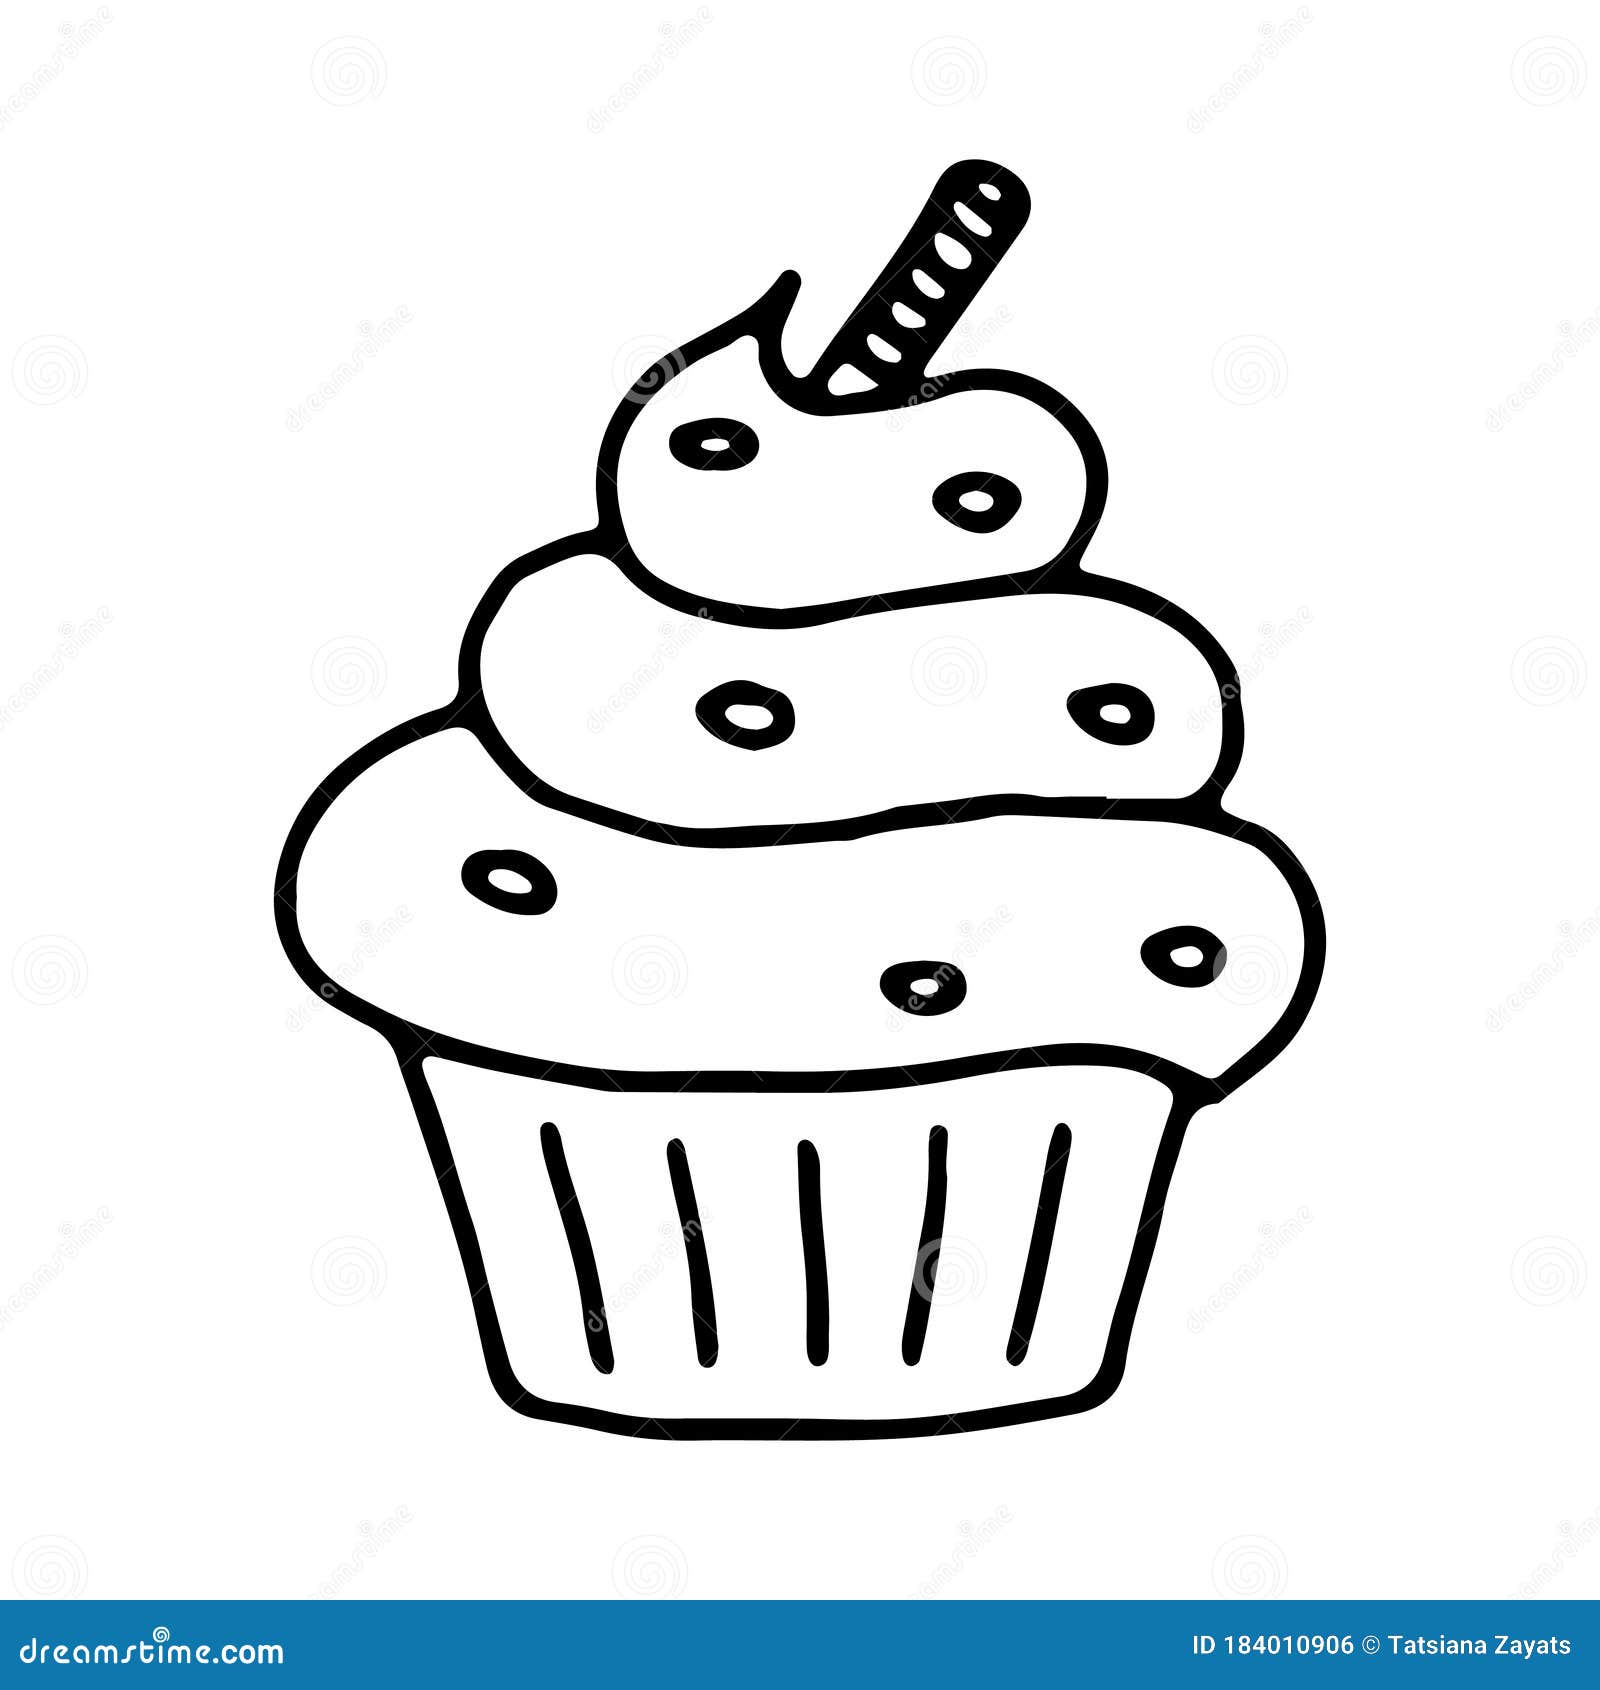 Cupcake Outline Doodle Isolated Illustration on White Background Muffin  Linear Cartoon Icon Sweets and Candies Design Stock Vector - Illustration  of icon, candy: 184010906